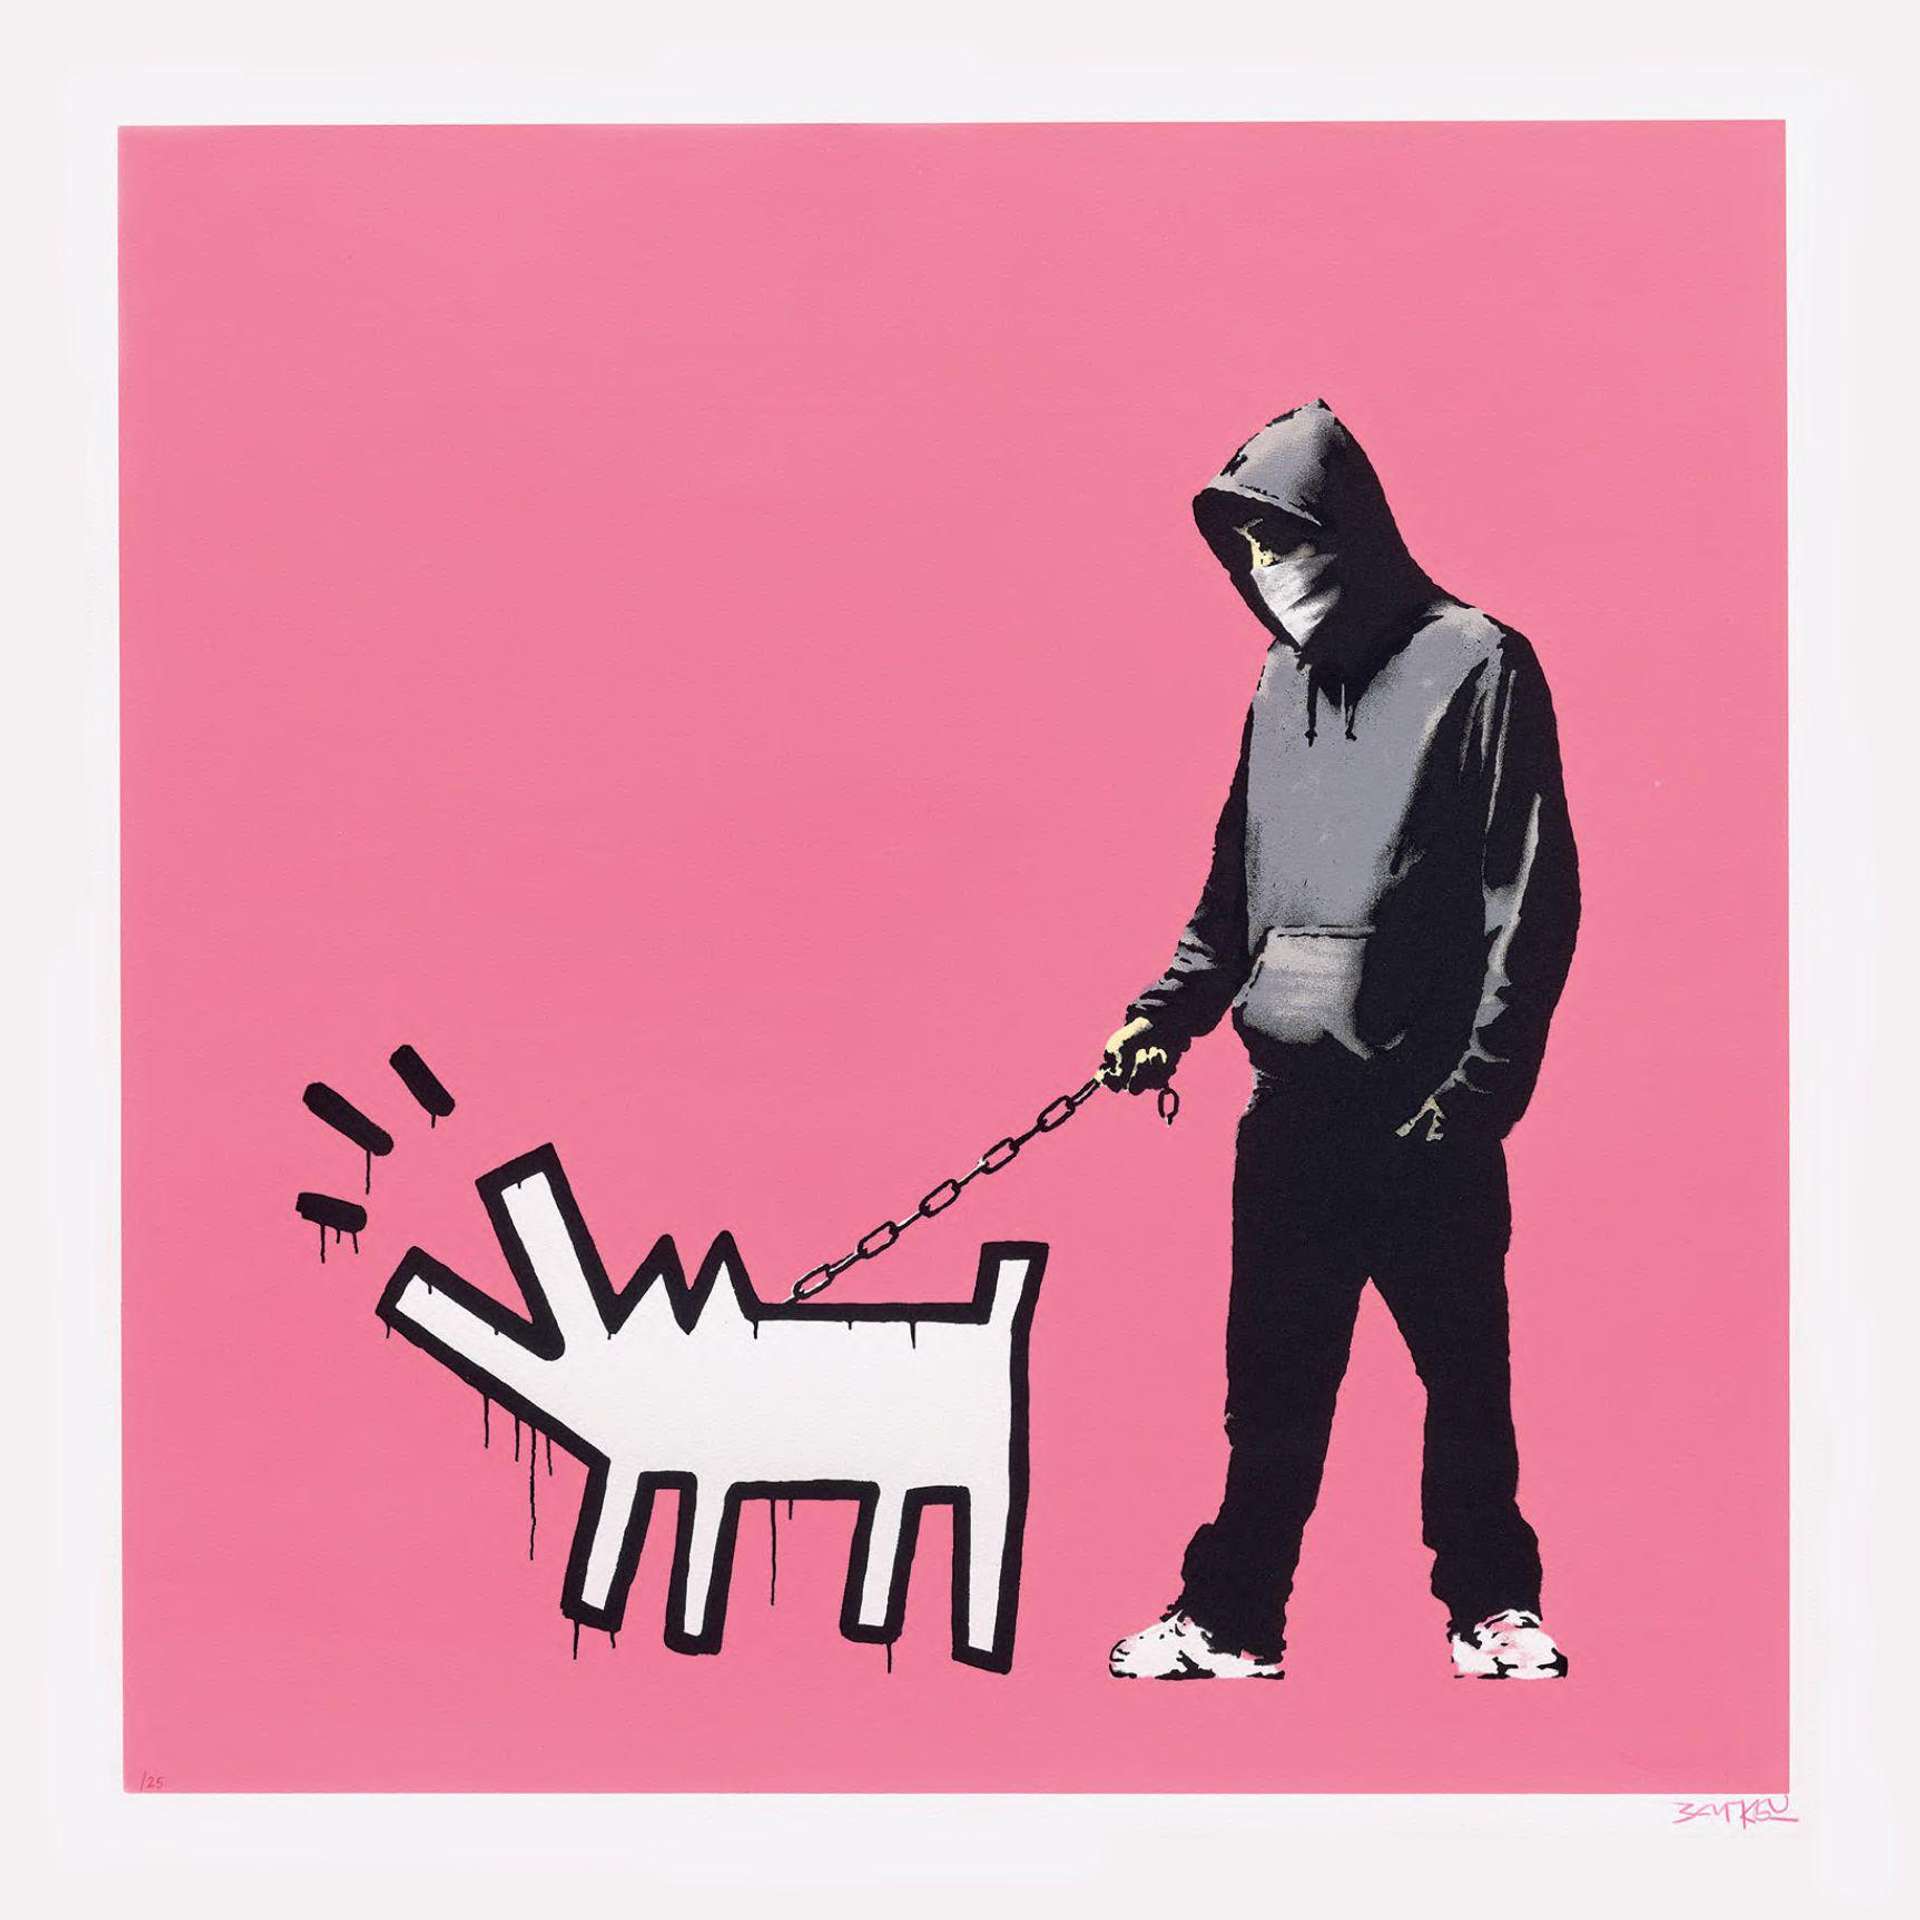 Banksy’s Choose Your Weapon. A man wearing a face covering and a hooded sweatshirt walking a Keith Haring style dog against a pink background.